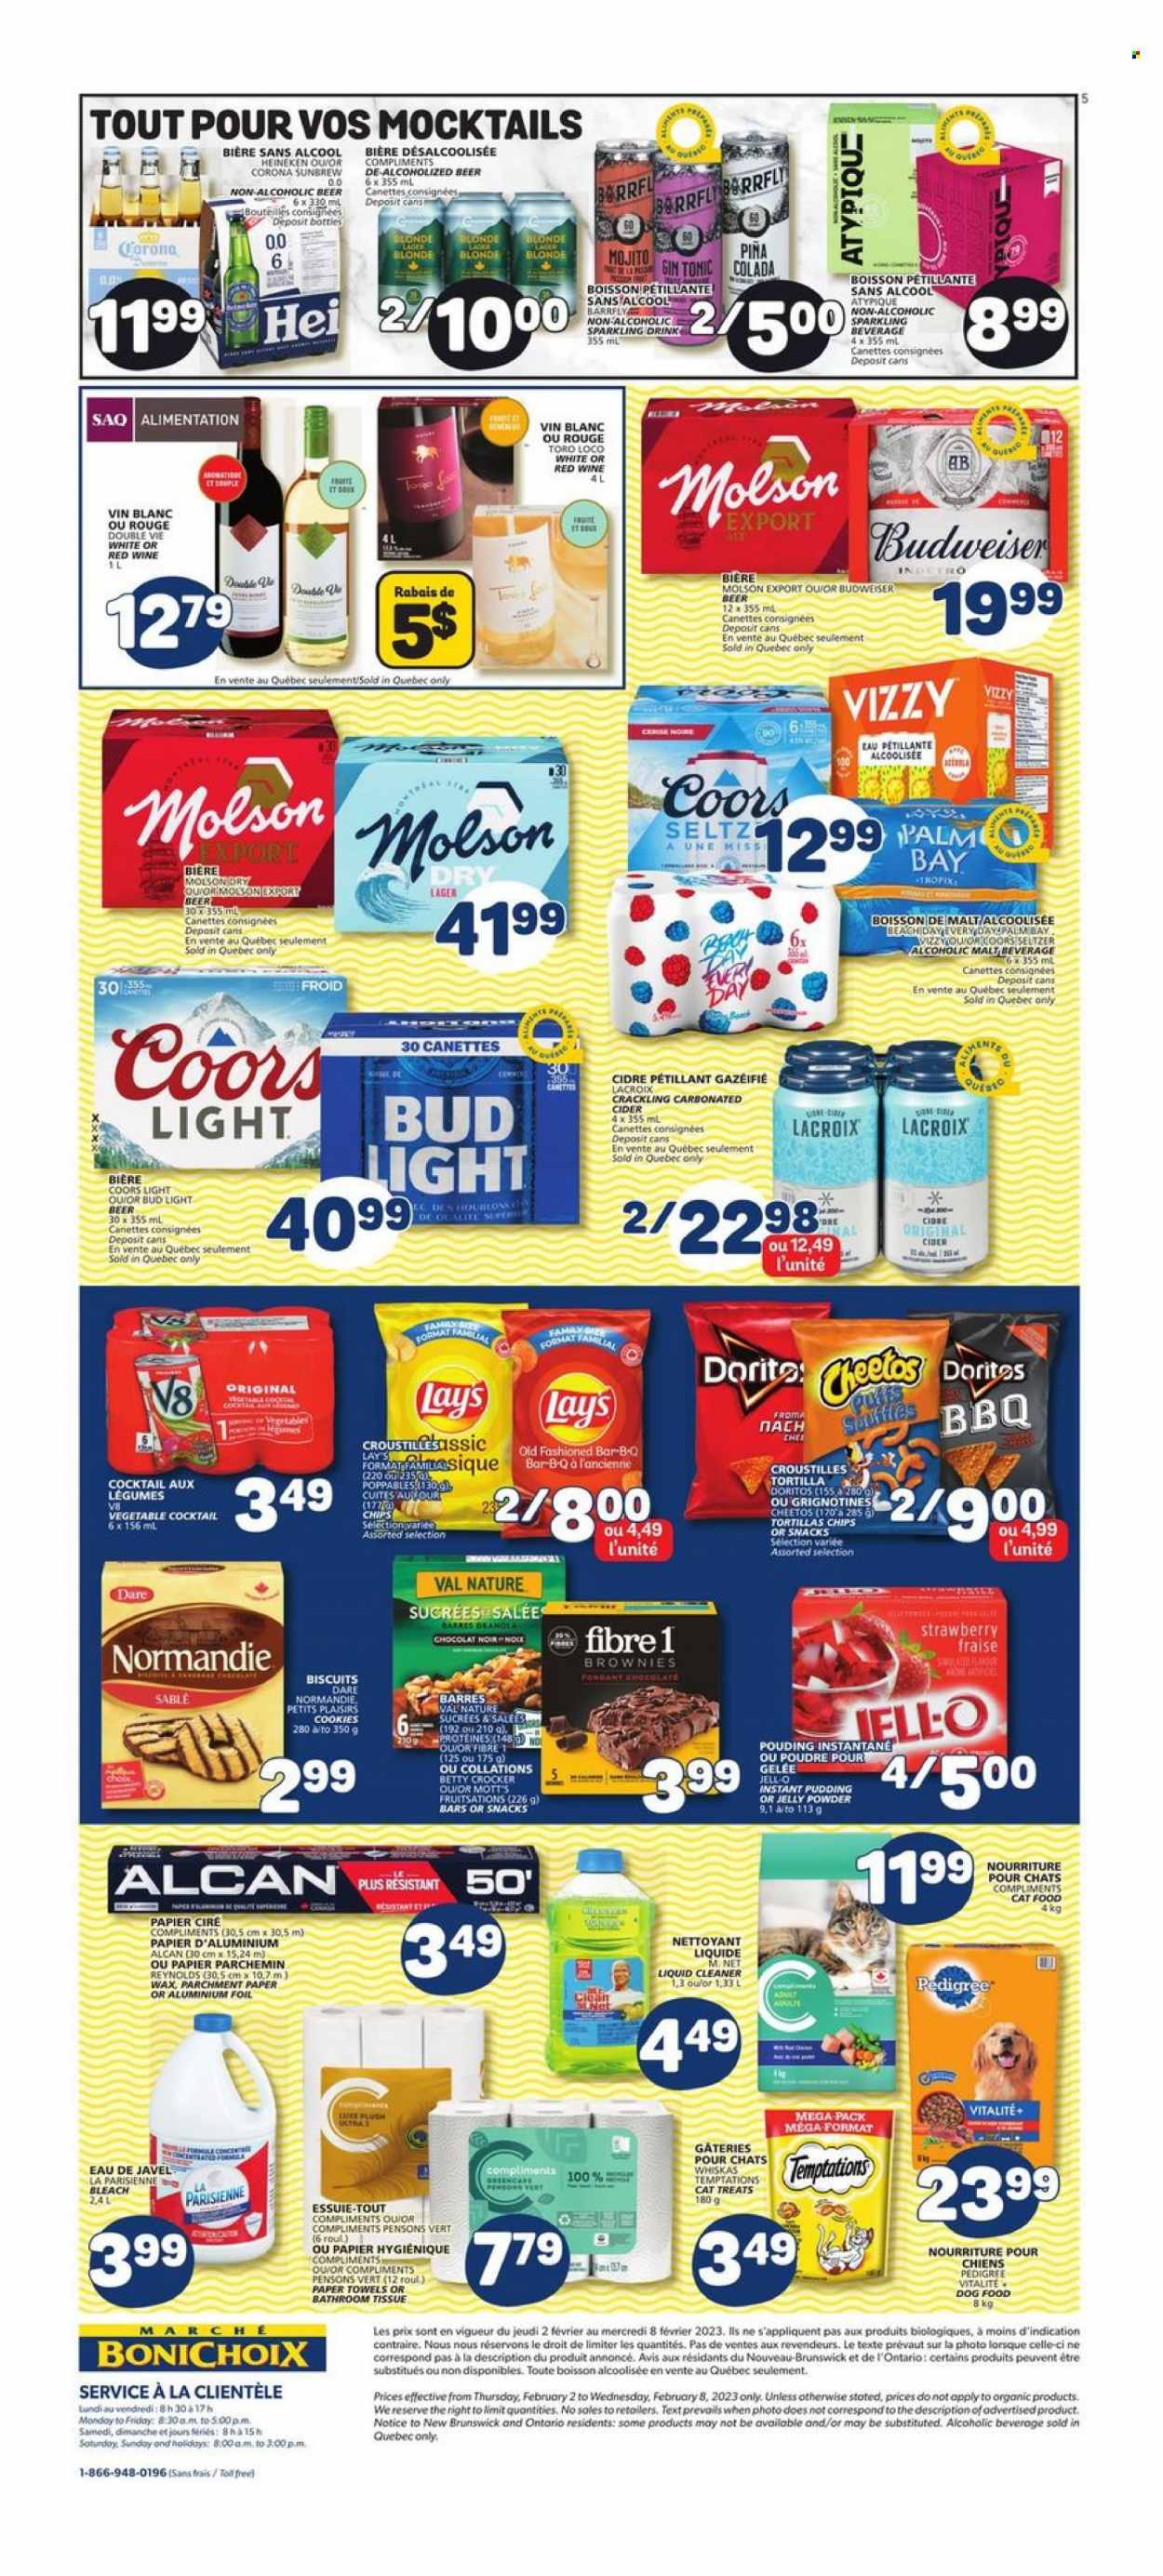 thumbnail - Marché Bonichoix Flyer - February 02, 2023 - February 08, 2023 - Sales products - tortillas, brownies, Mott's, pudding, cookies, chocolate, jelly, biscuit, Doritos, Cheetos, chips, Lay’s, Jell-O, malt, tonic, seltzer water, red wine, wine, cider, beer, Bud Light, Corona Extra, Heineken, Lager, bath tissue, kitchen towels, paper towels, cleaner, bleach, liquid cleaner, Budweiser, granola, Whiskas, Coors. Page 5.